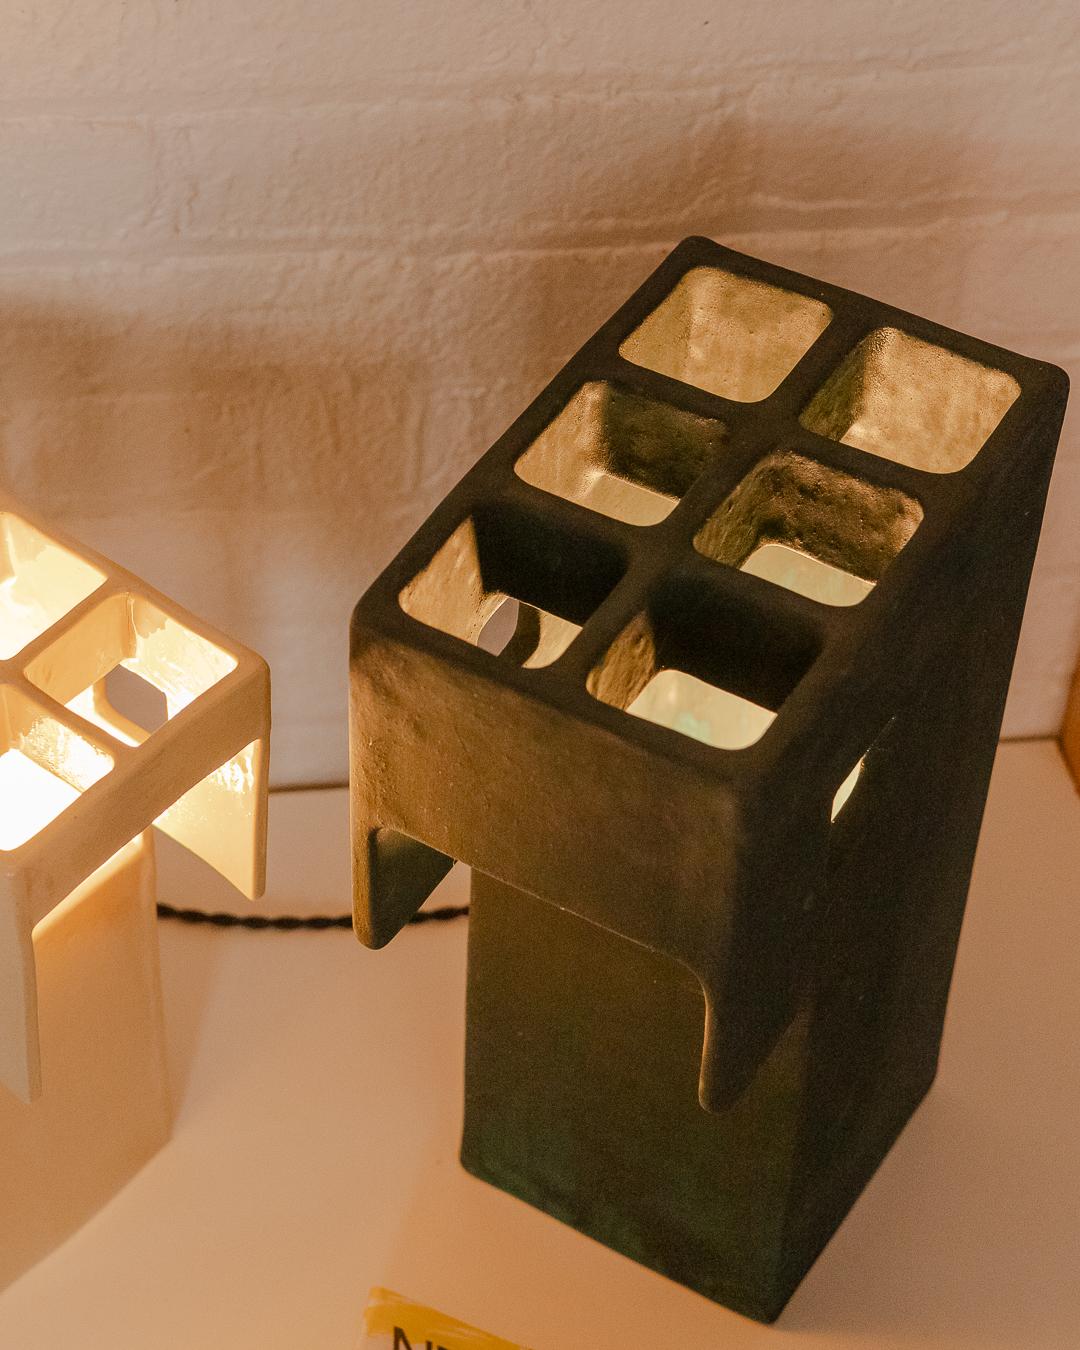 Ceramic Ding Dong Table Lamp by Luft Tanaka, ceramic, dark green, brutalist, geometric For Sale